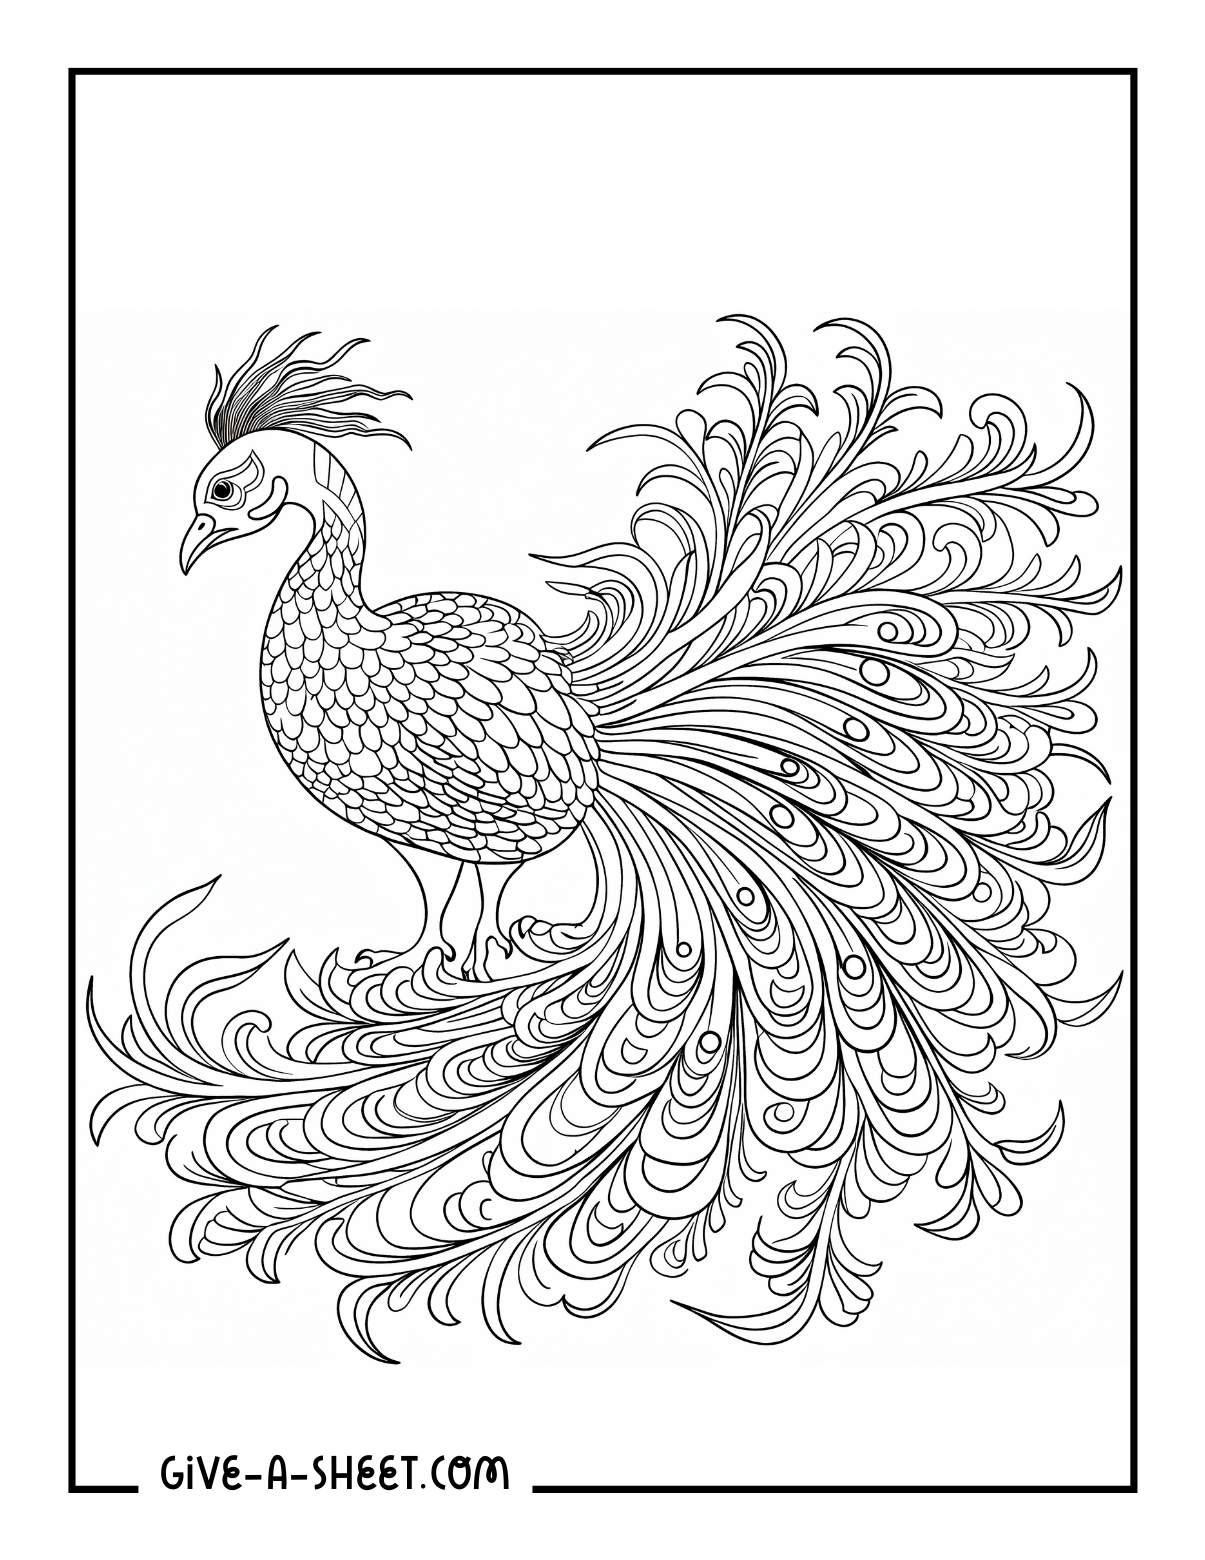 Wild turkey coloring pages with feathers to color in.